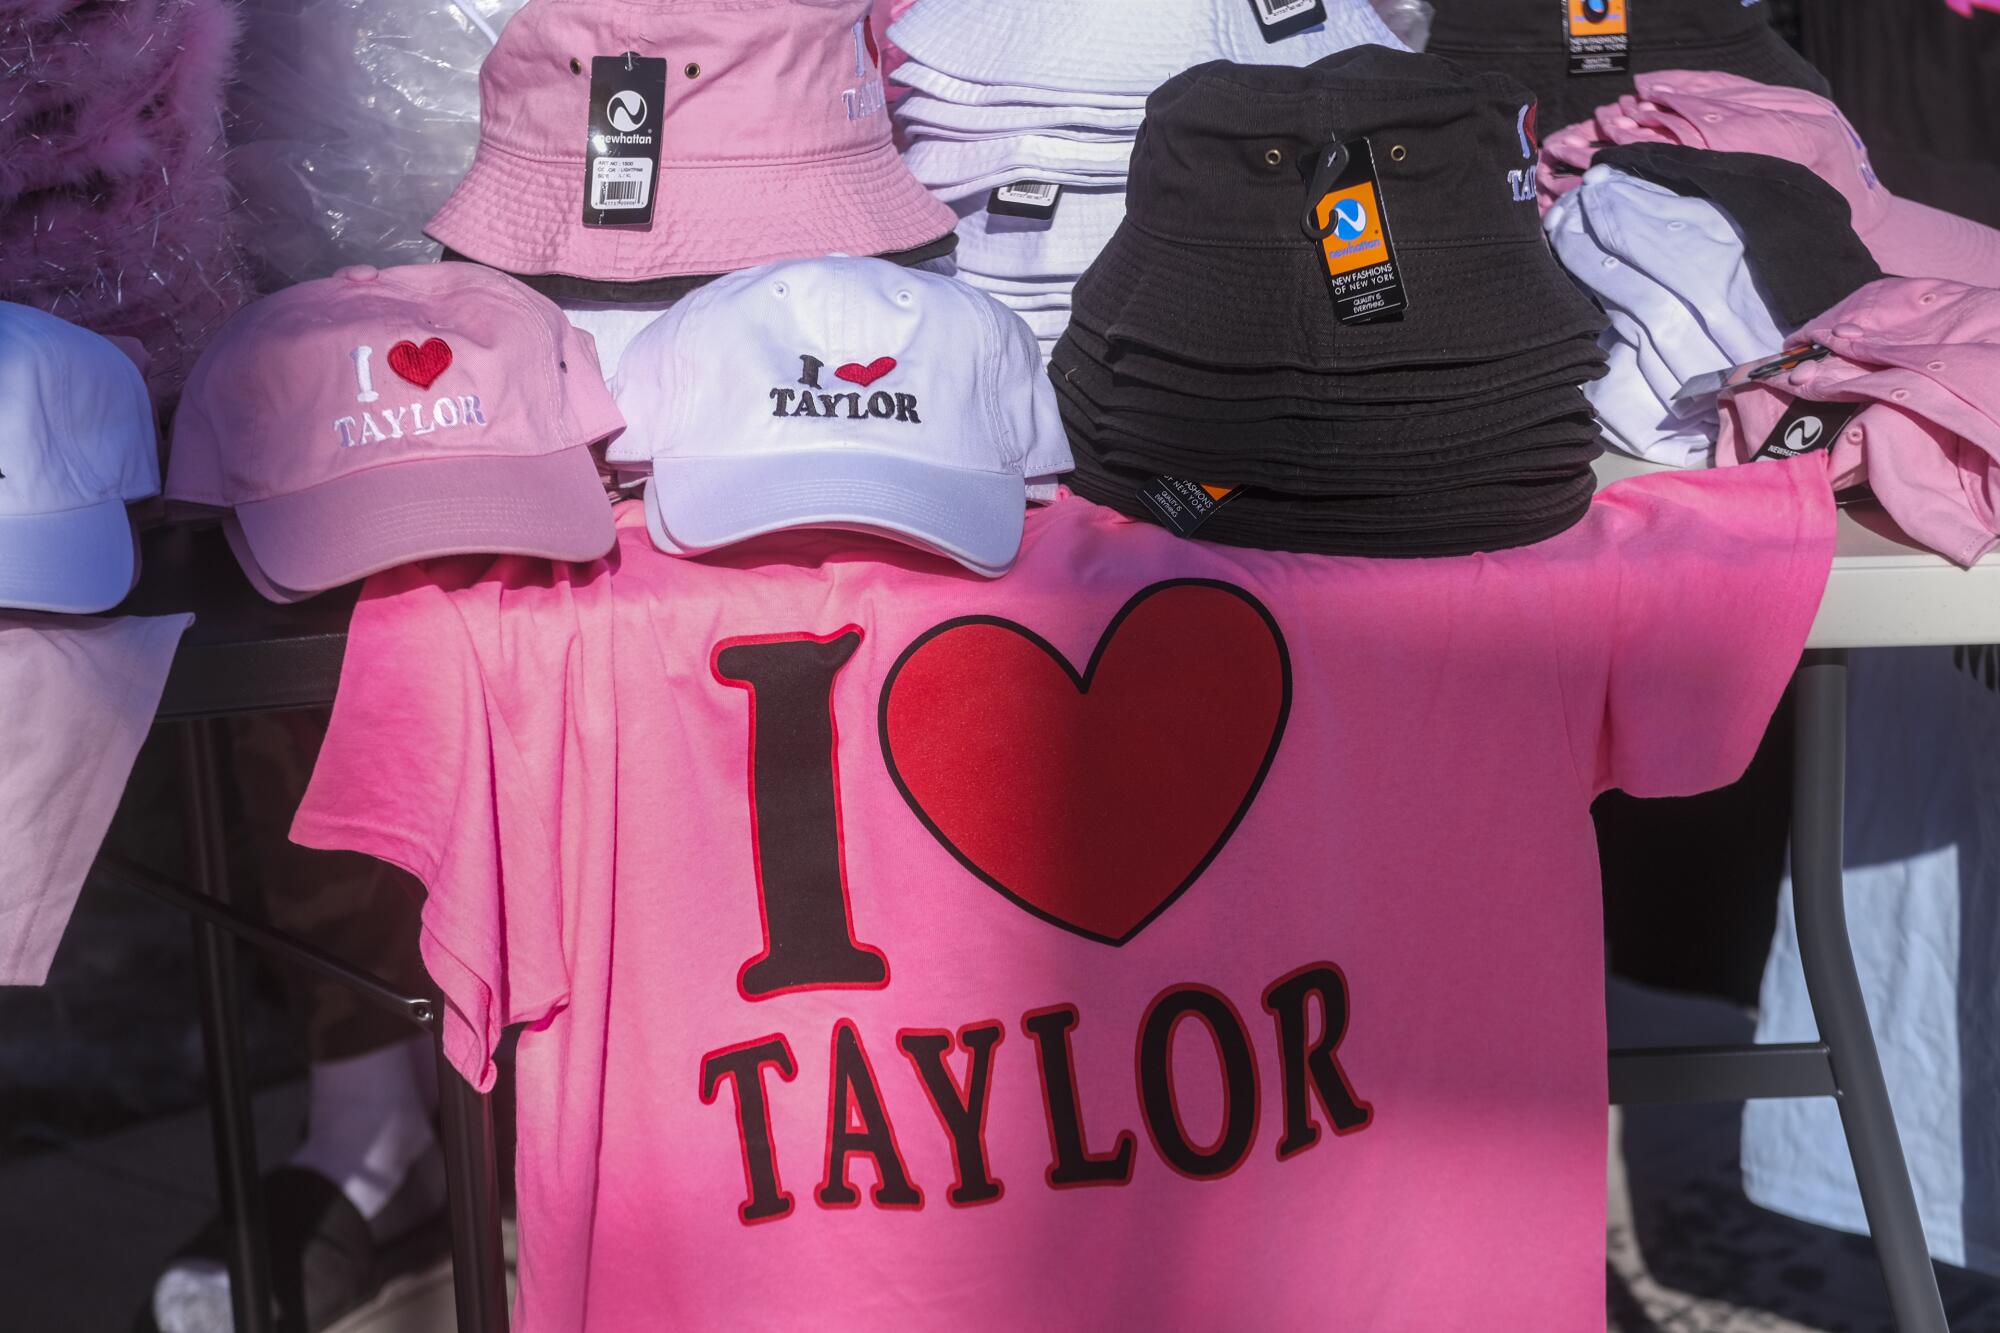 I love Taylor shirts in pink